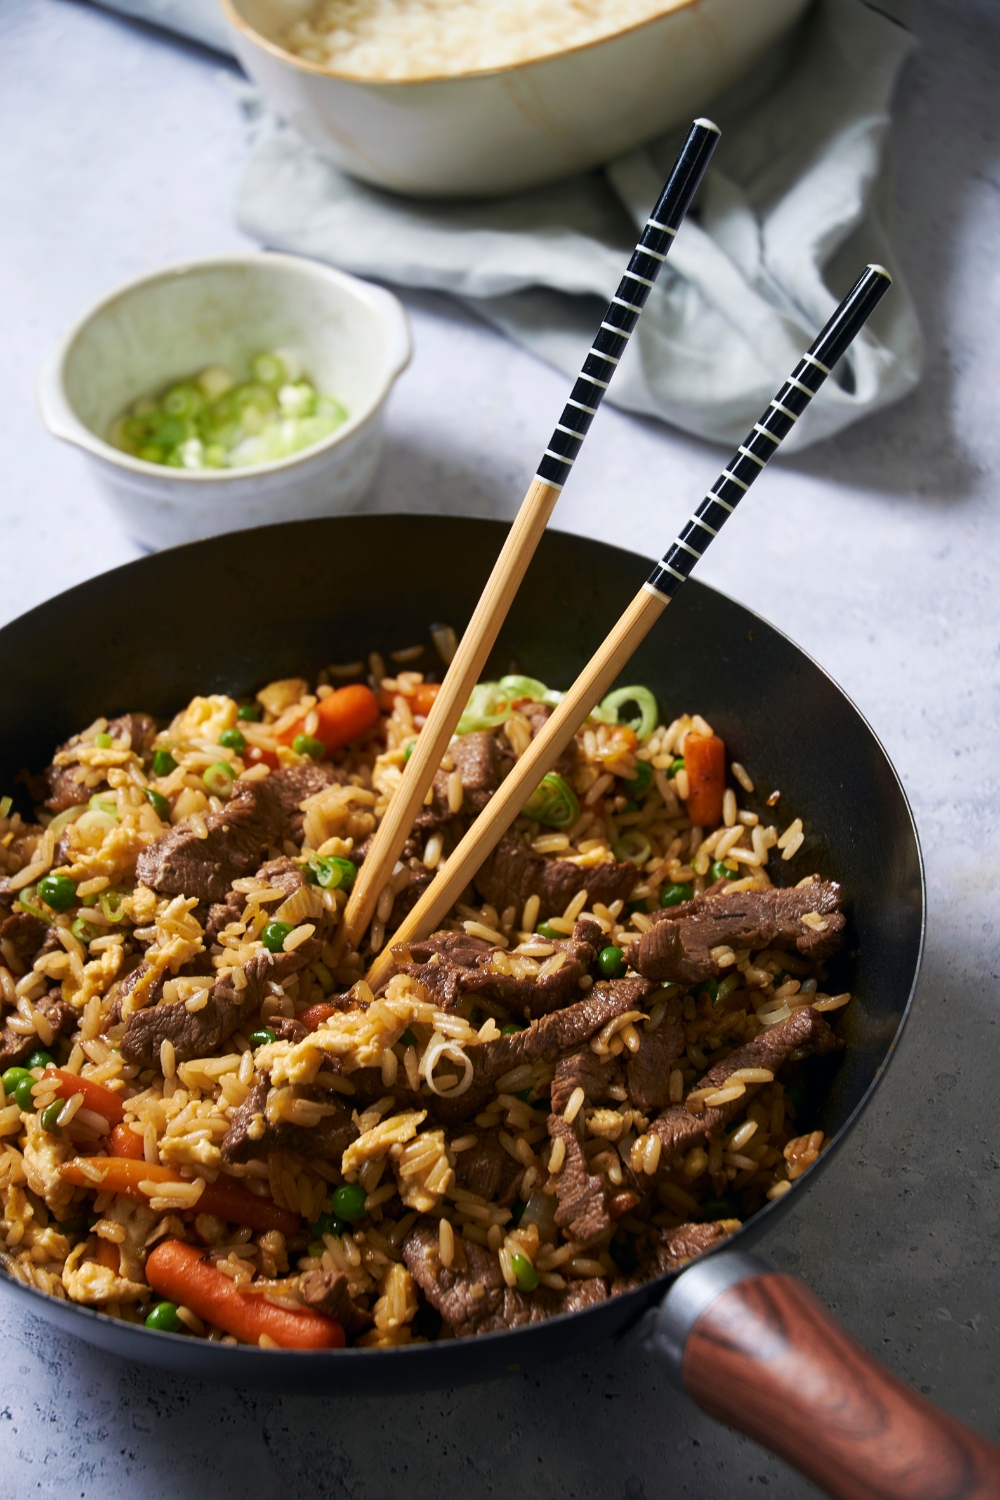 A black skillet filled with rice, peas, carrots, cooked beef, and green onions. There is a pair of chopsticks in the skillet and a small bowl of green onions in the background.